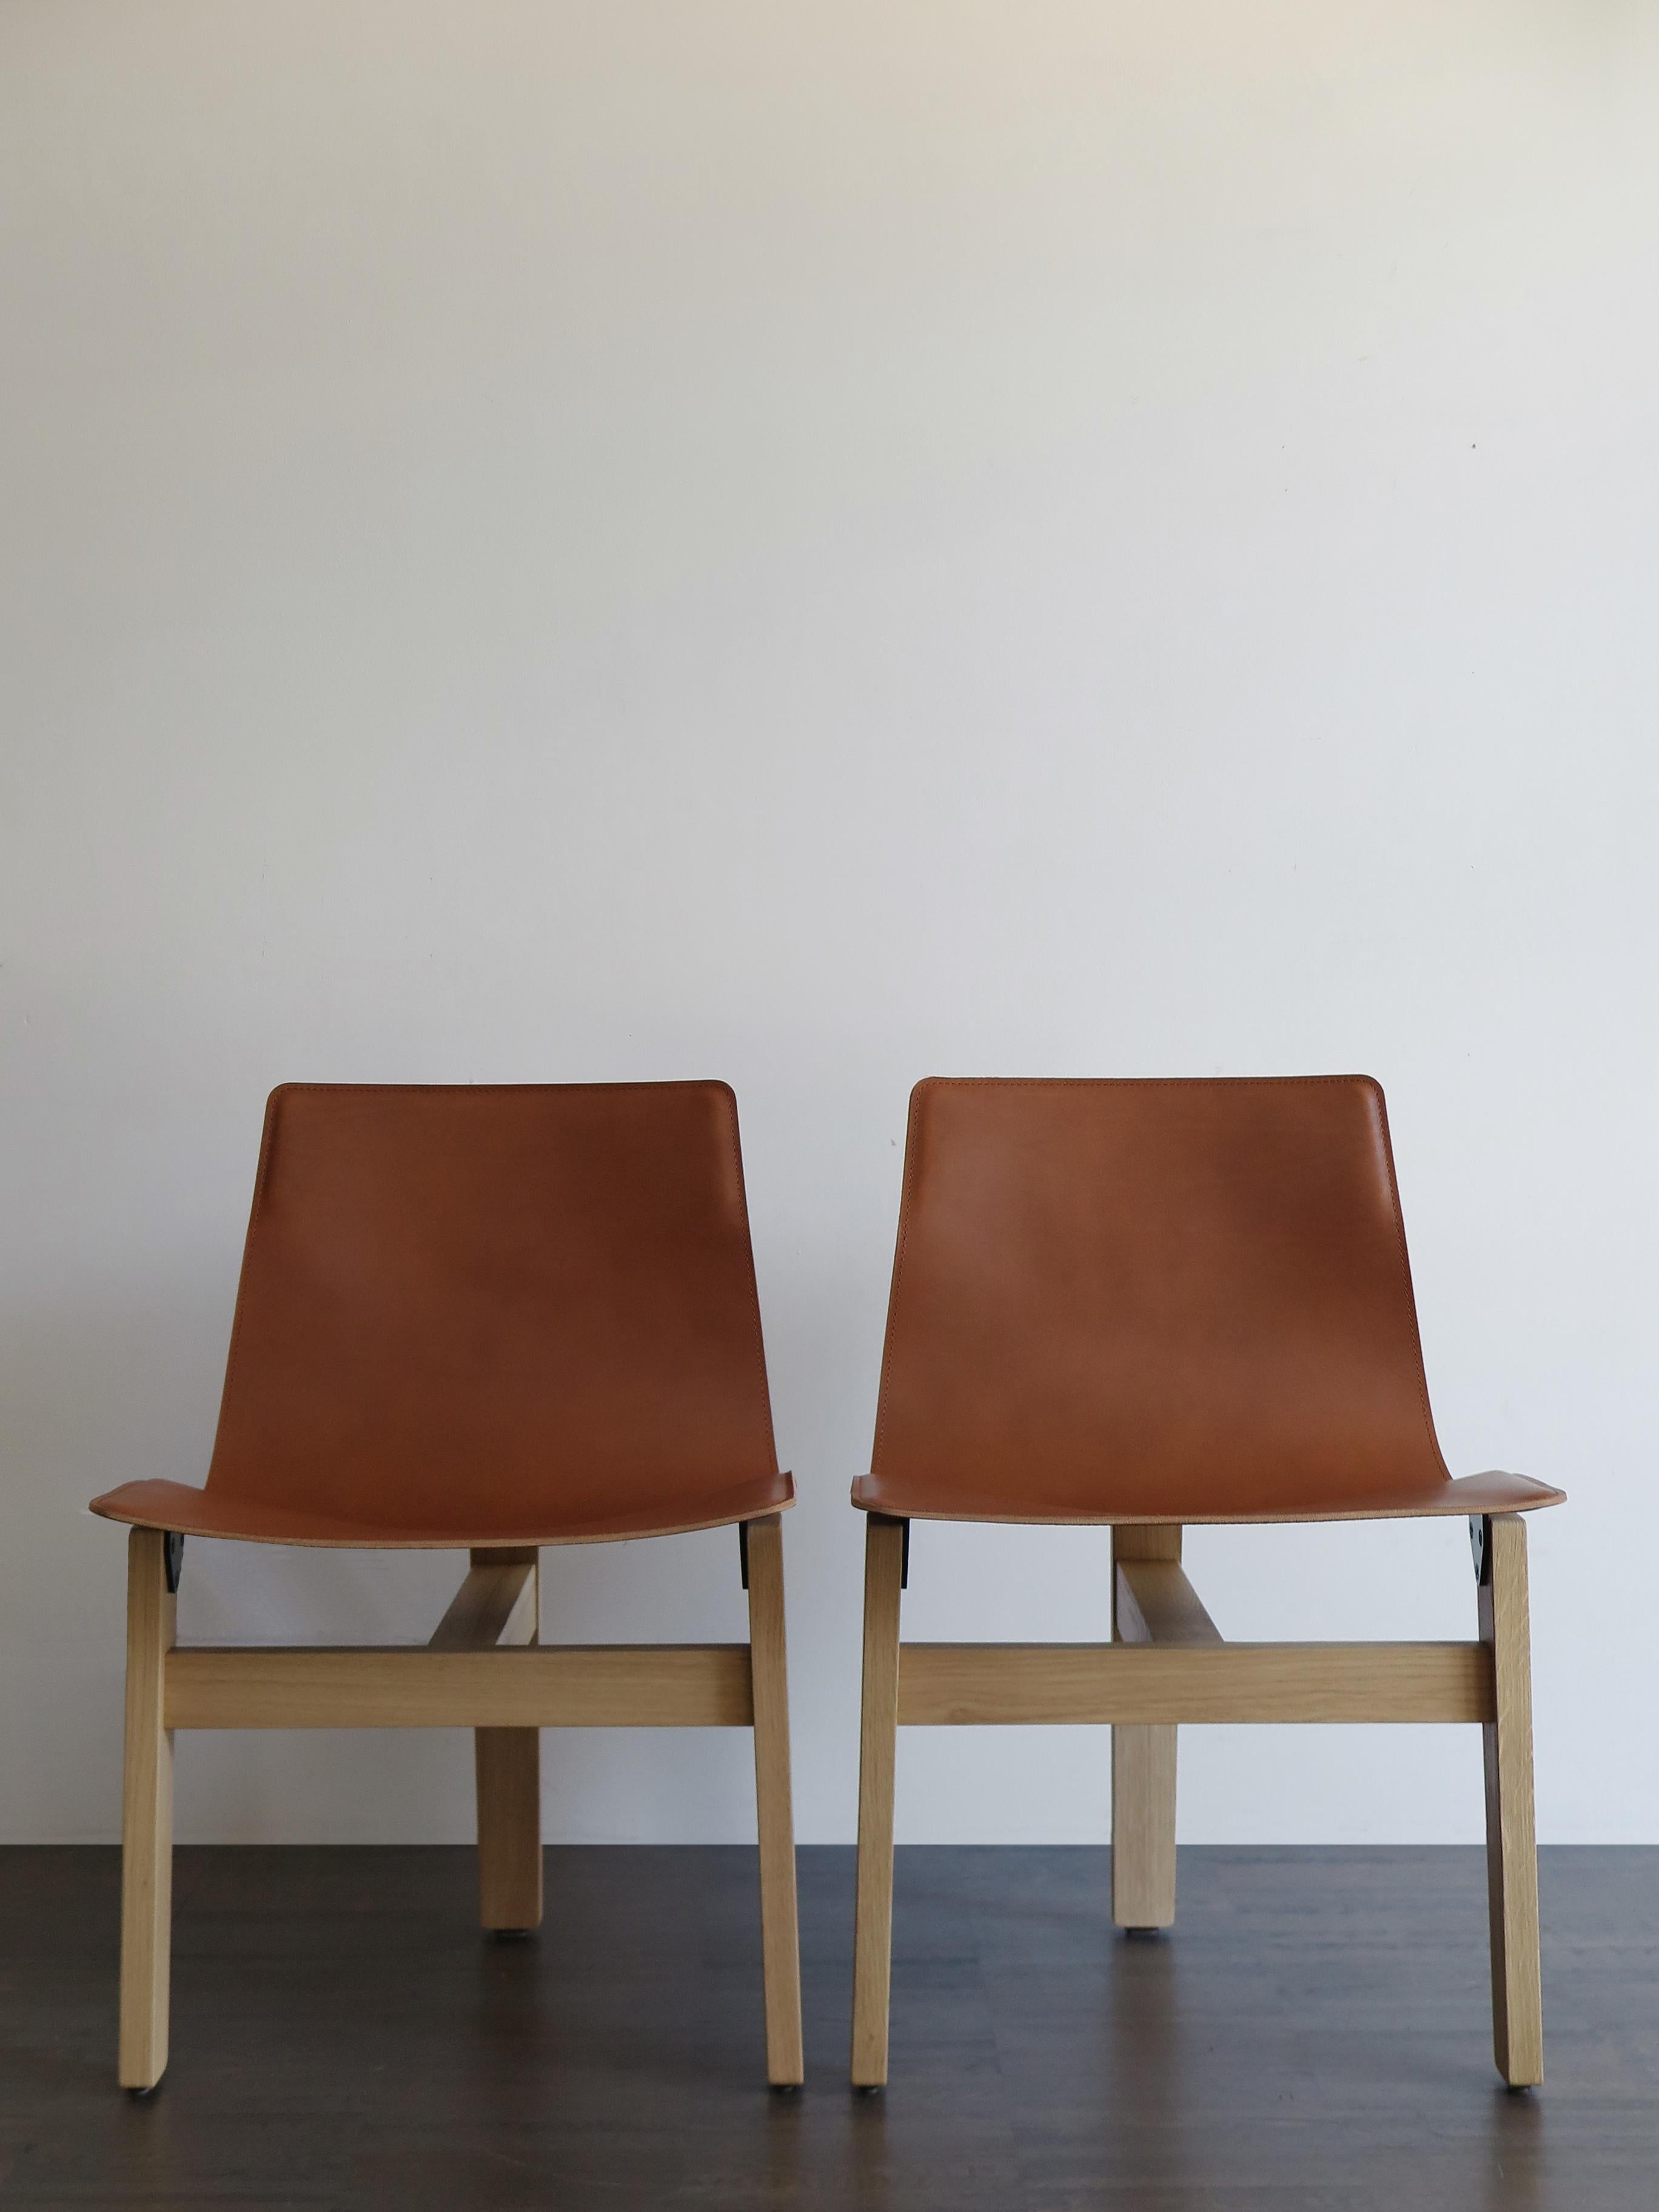 Modern Angelo Mangiarotti Italian Leather and Wood Dining Chairs for Agapecasa For Sale